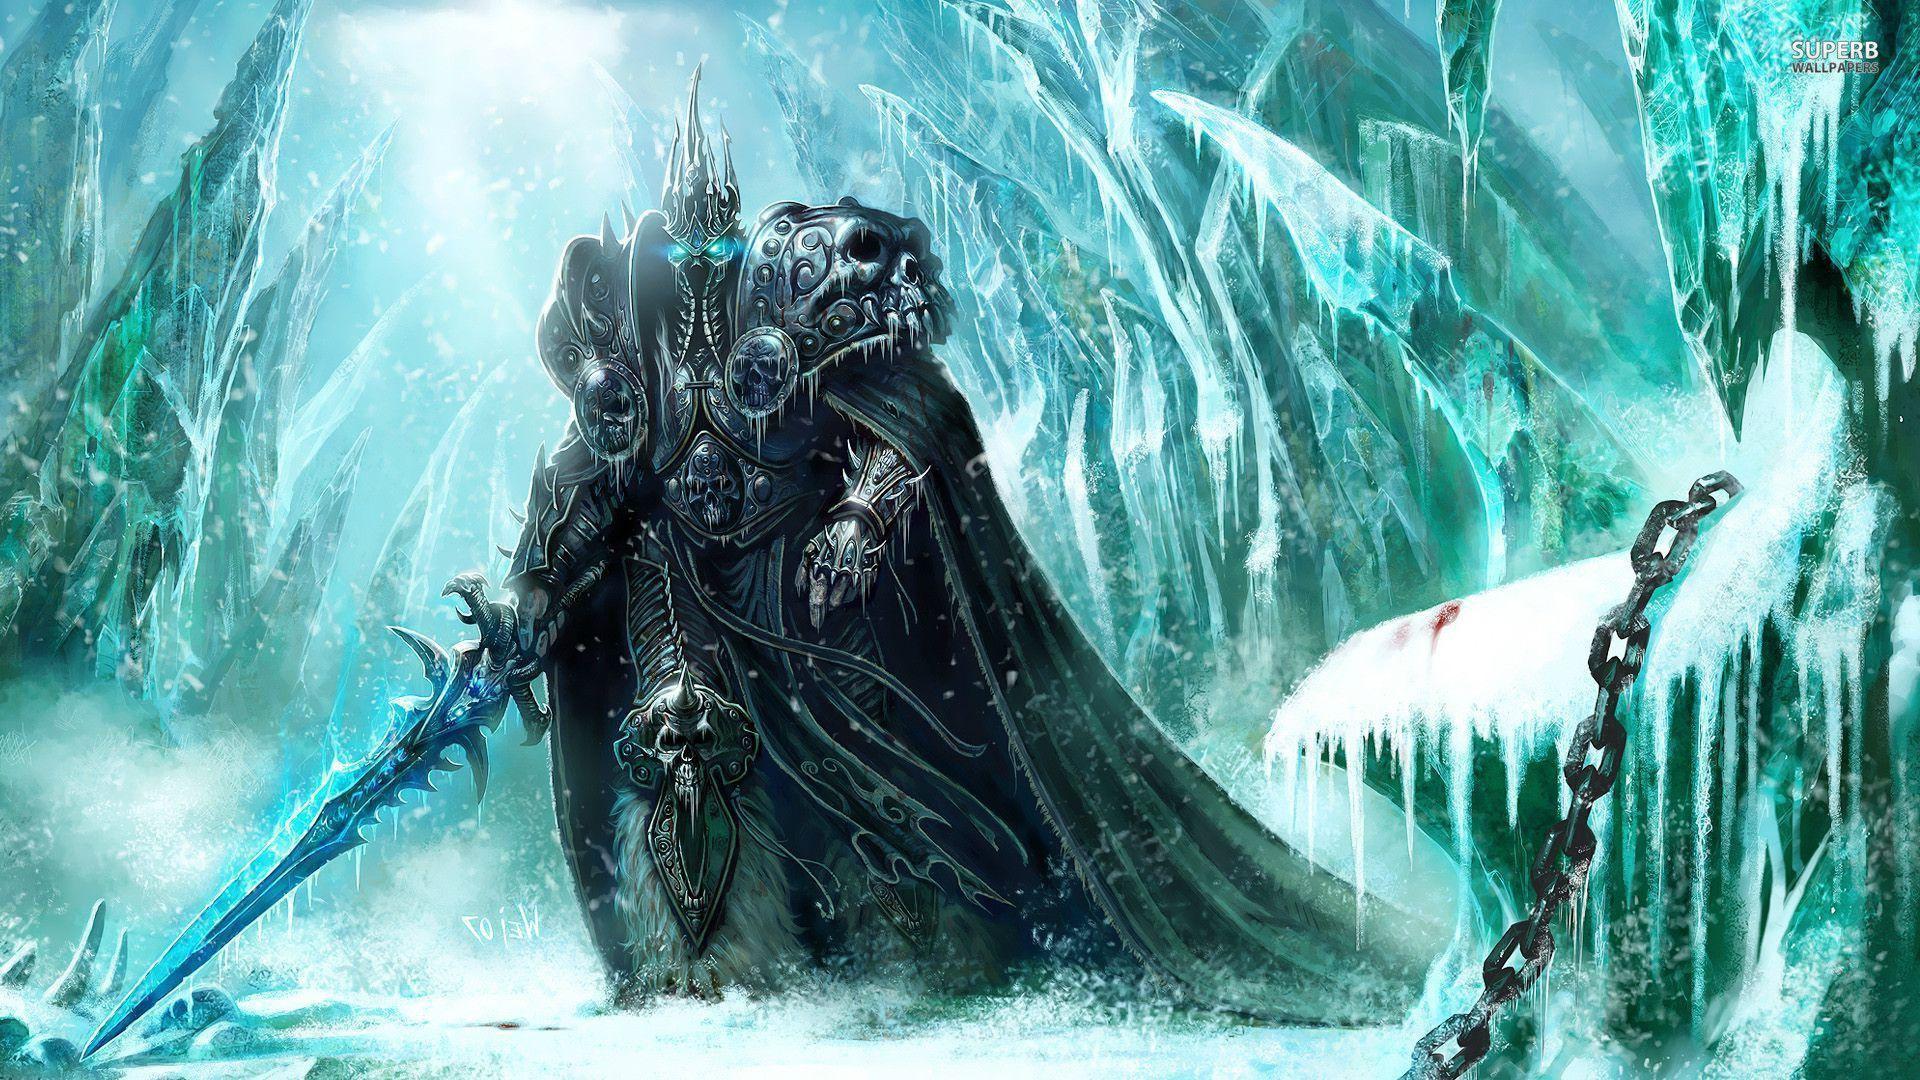 Wrath of the Lich King wallpaper